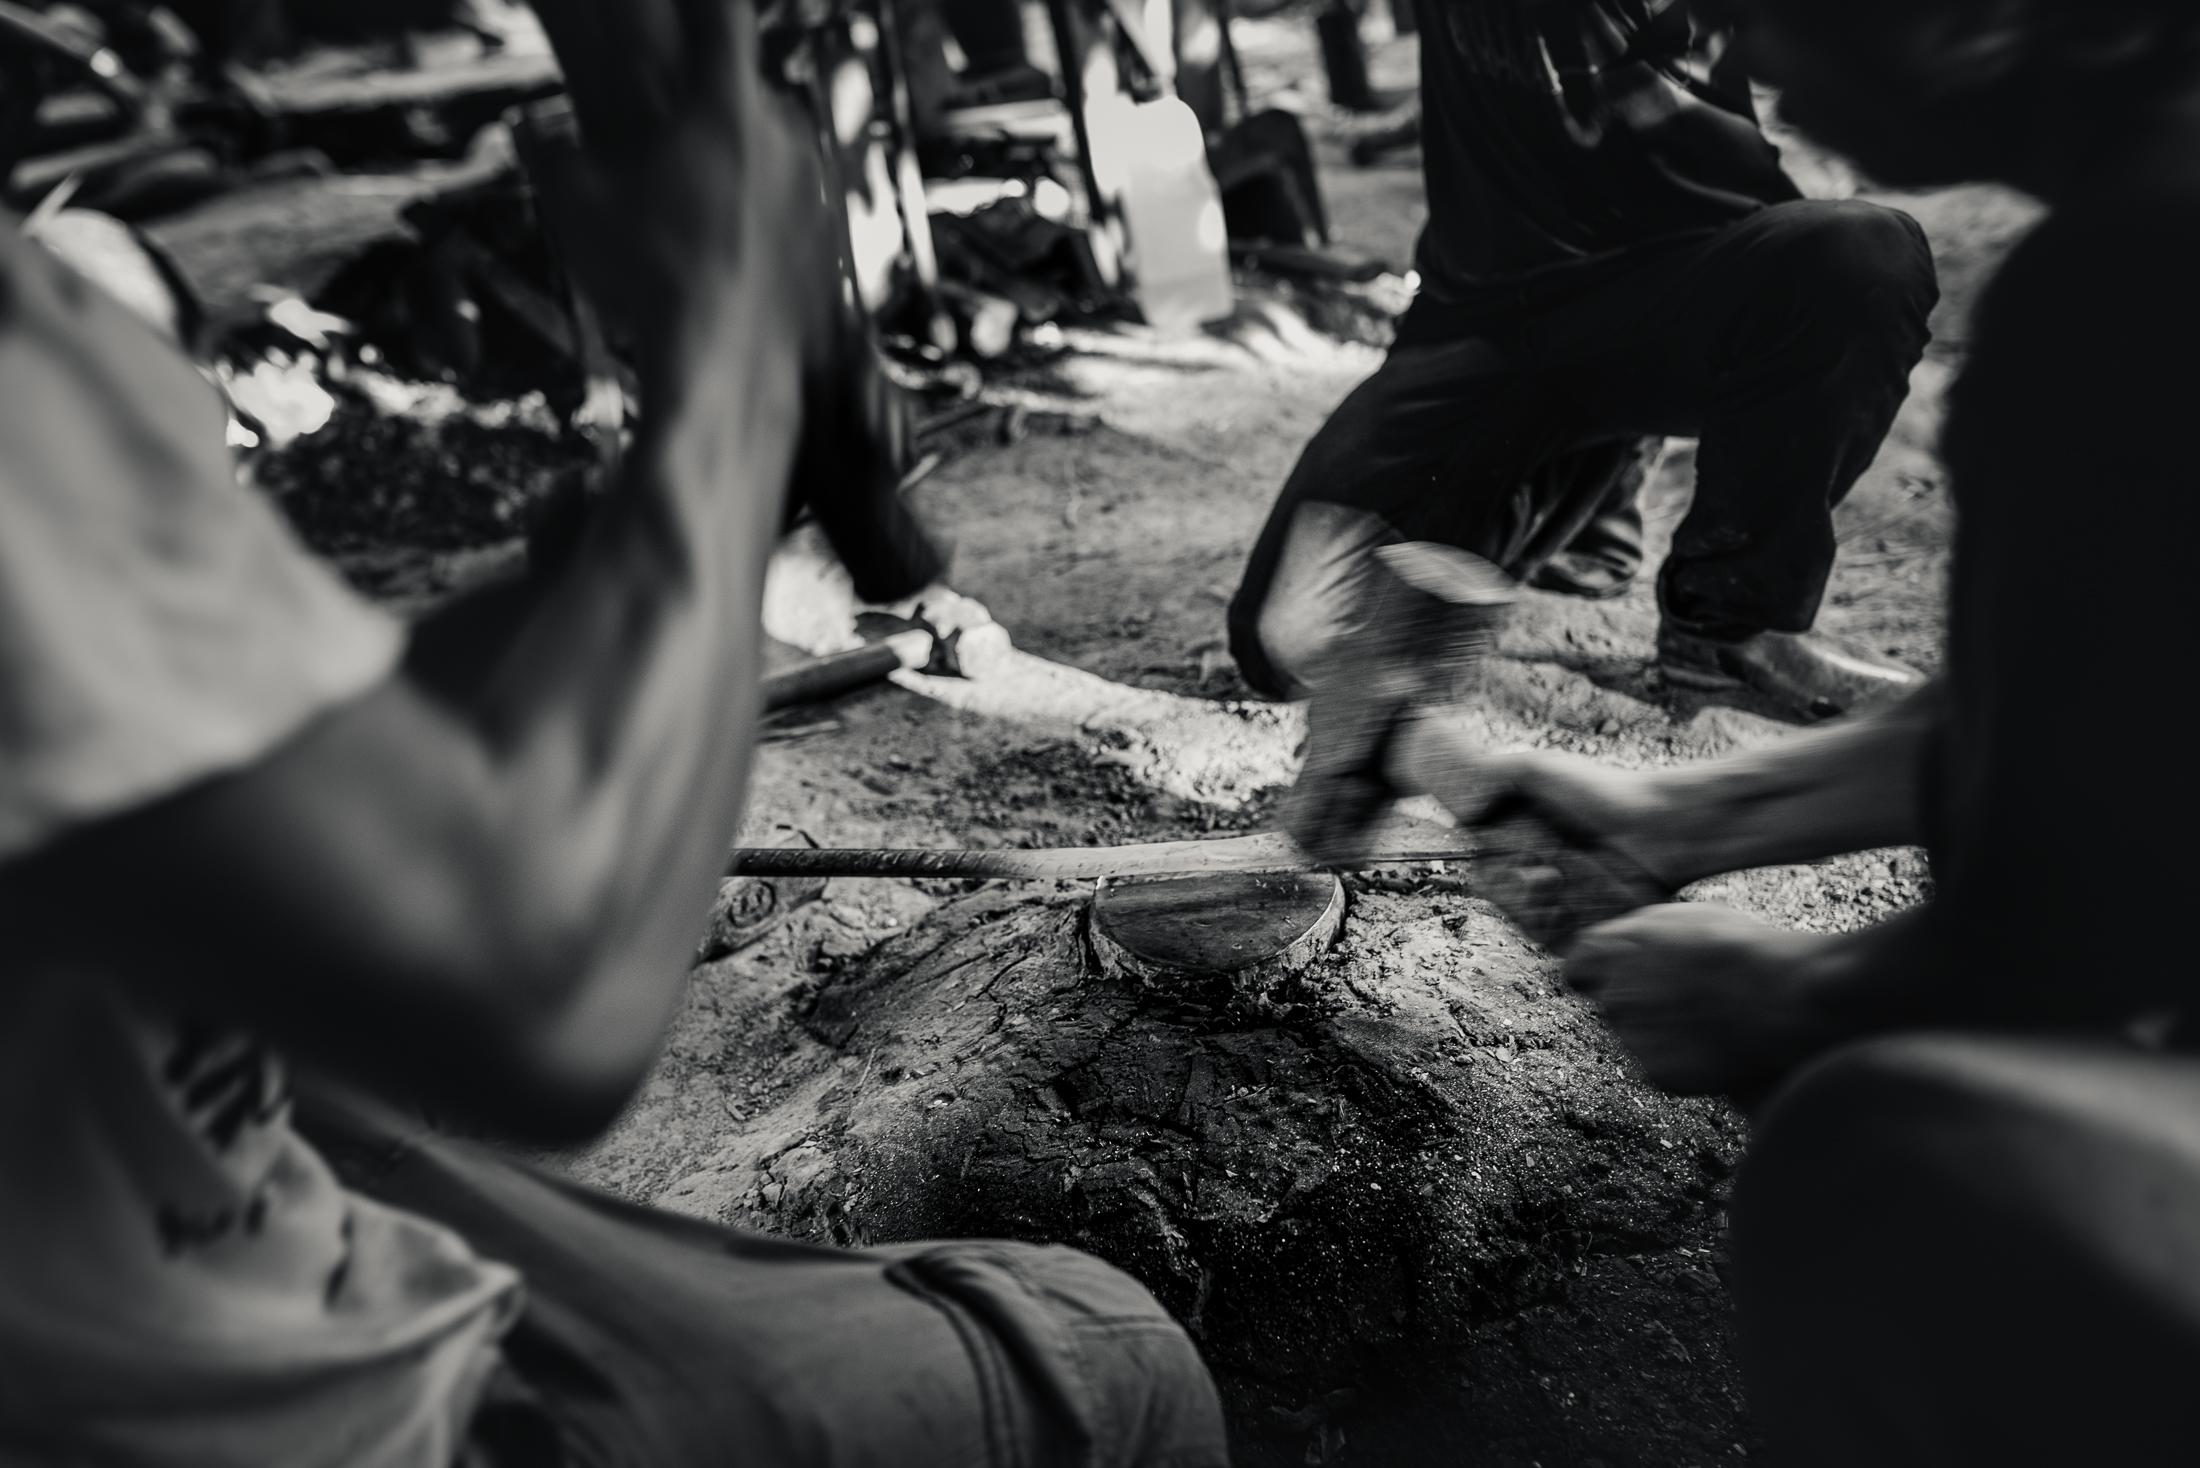 Indigenous Land Rights in Sarawak -  Metal Workers hammer out a parang blade in the Long Beku...